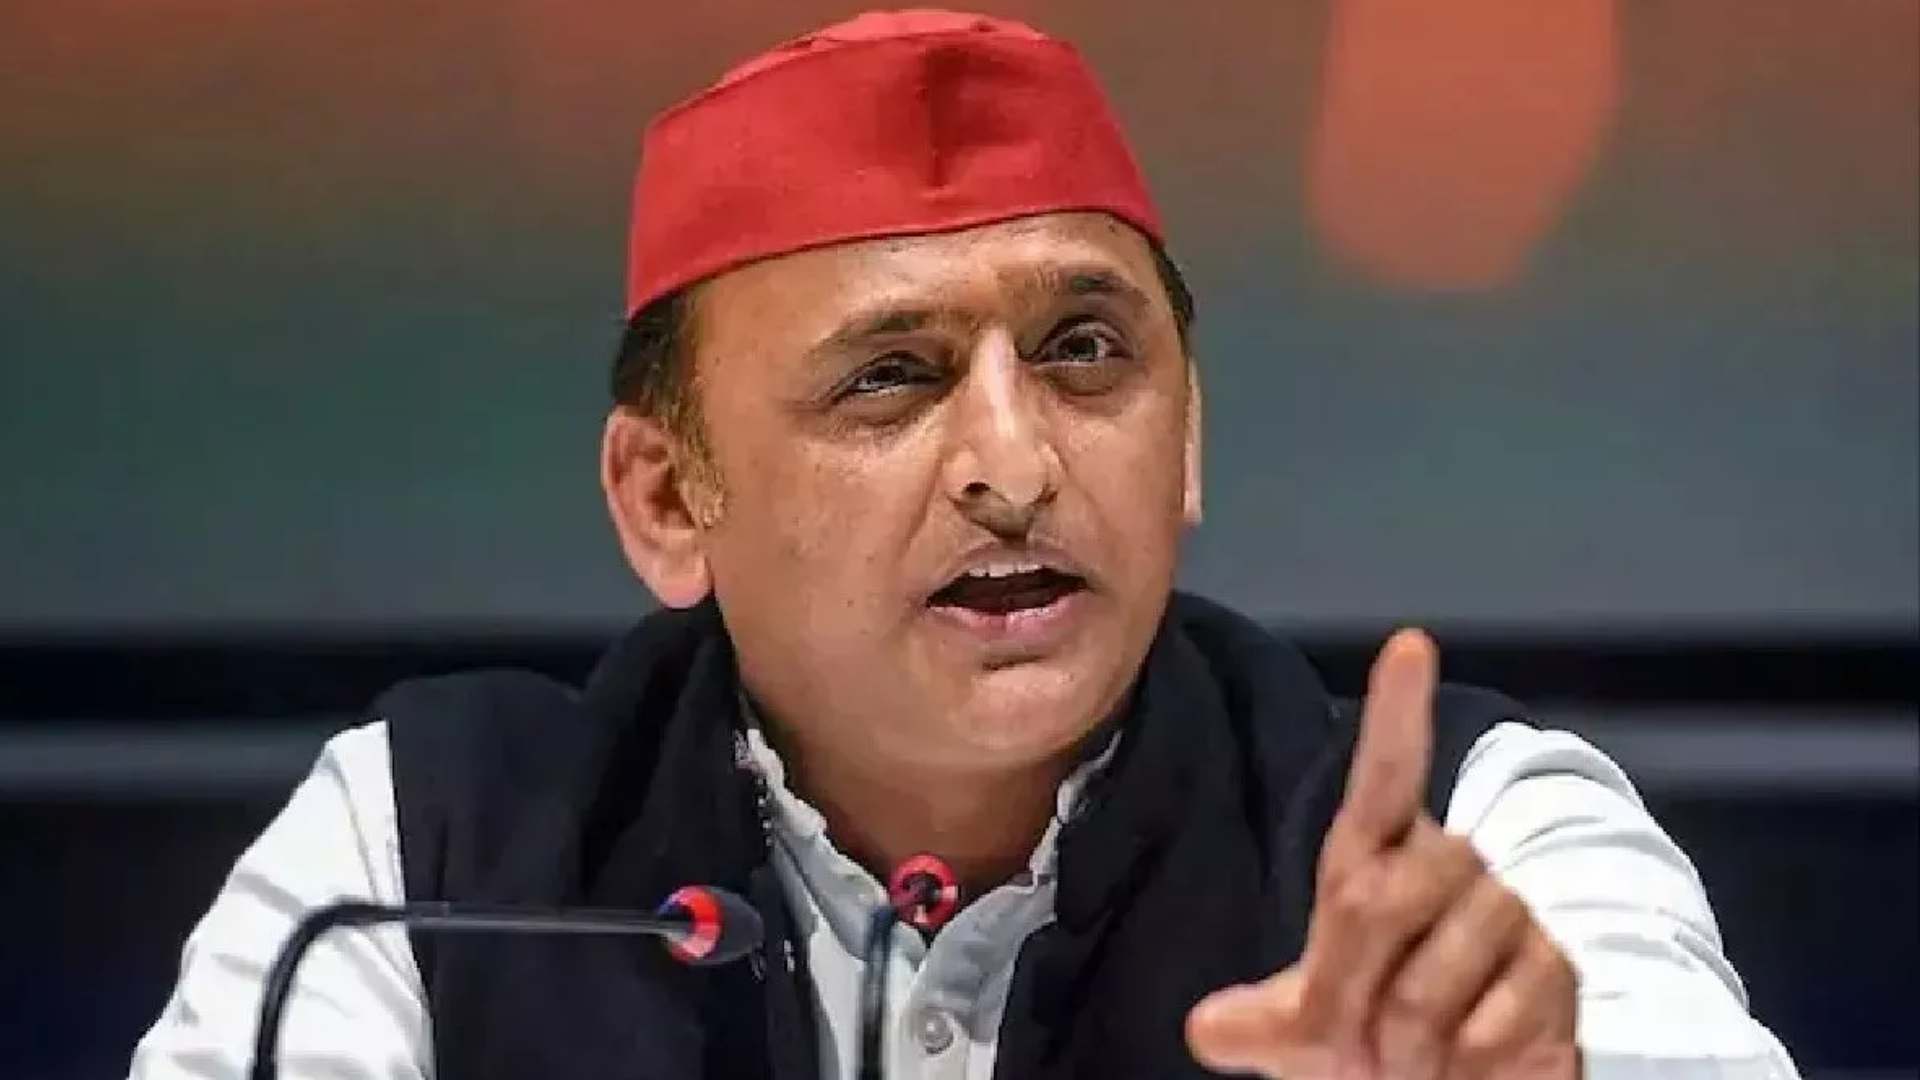 BJP arrested opposition leaders to divert attention from expose on electoral bonds: Akhilesh